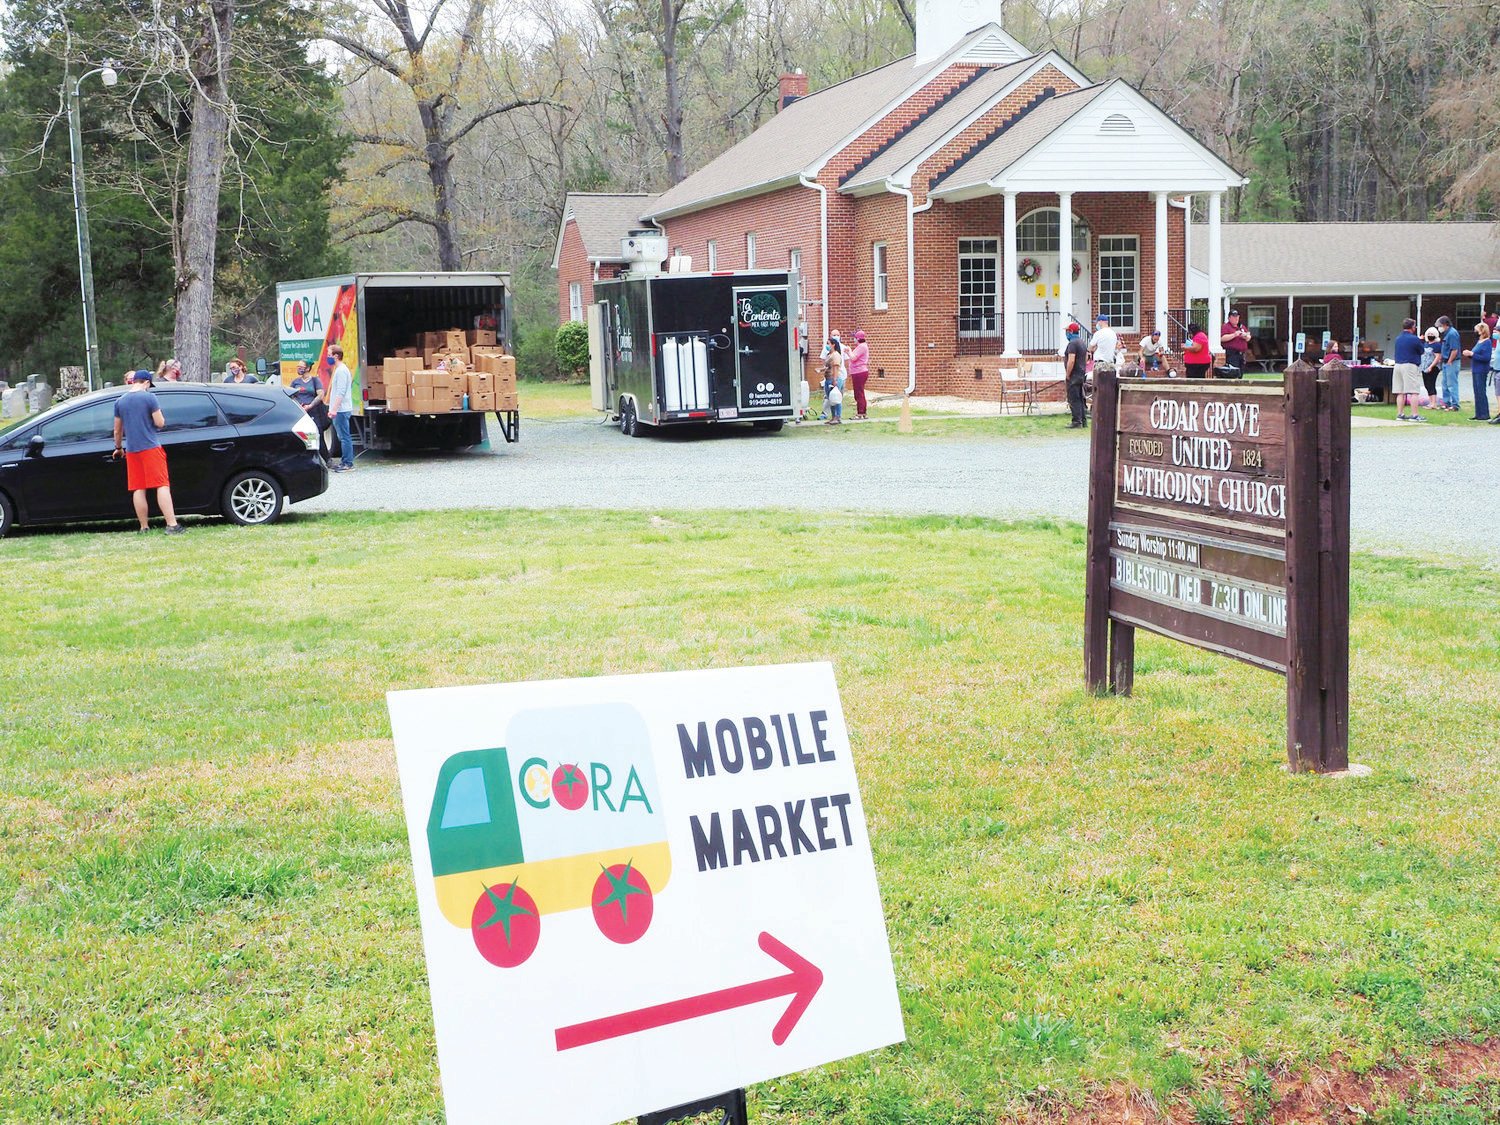 The CORA Mobile Market visited Cedar Grove UMC's monthly 'Pay What You Can' event in April. They've also provided some food boxes for distribution at Cedar Grove's 'Summer Fiesta' event with Ta Contento this Saturday.